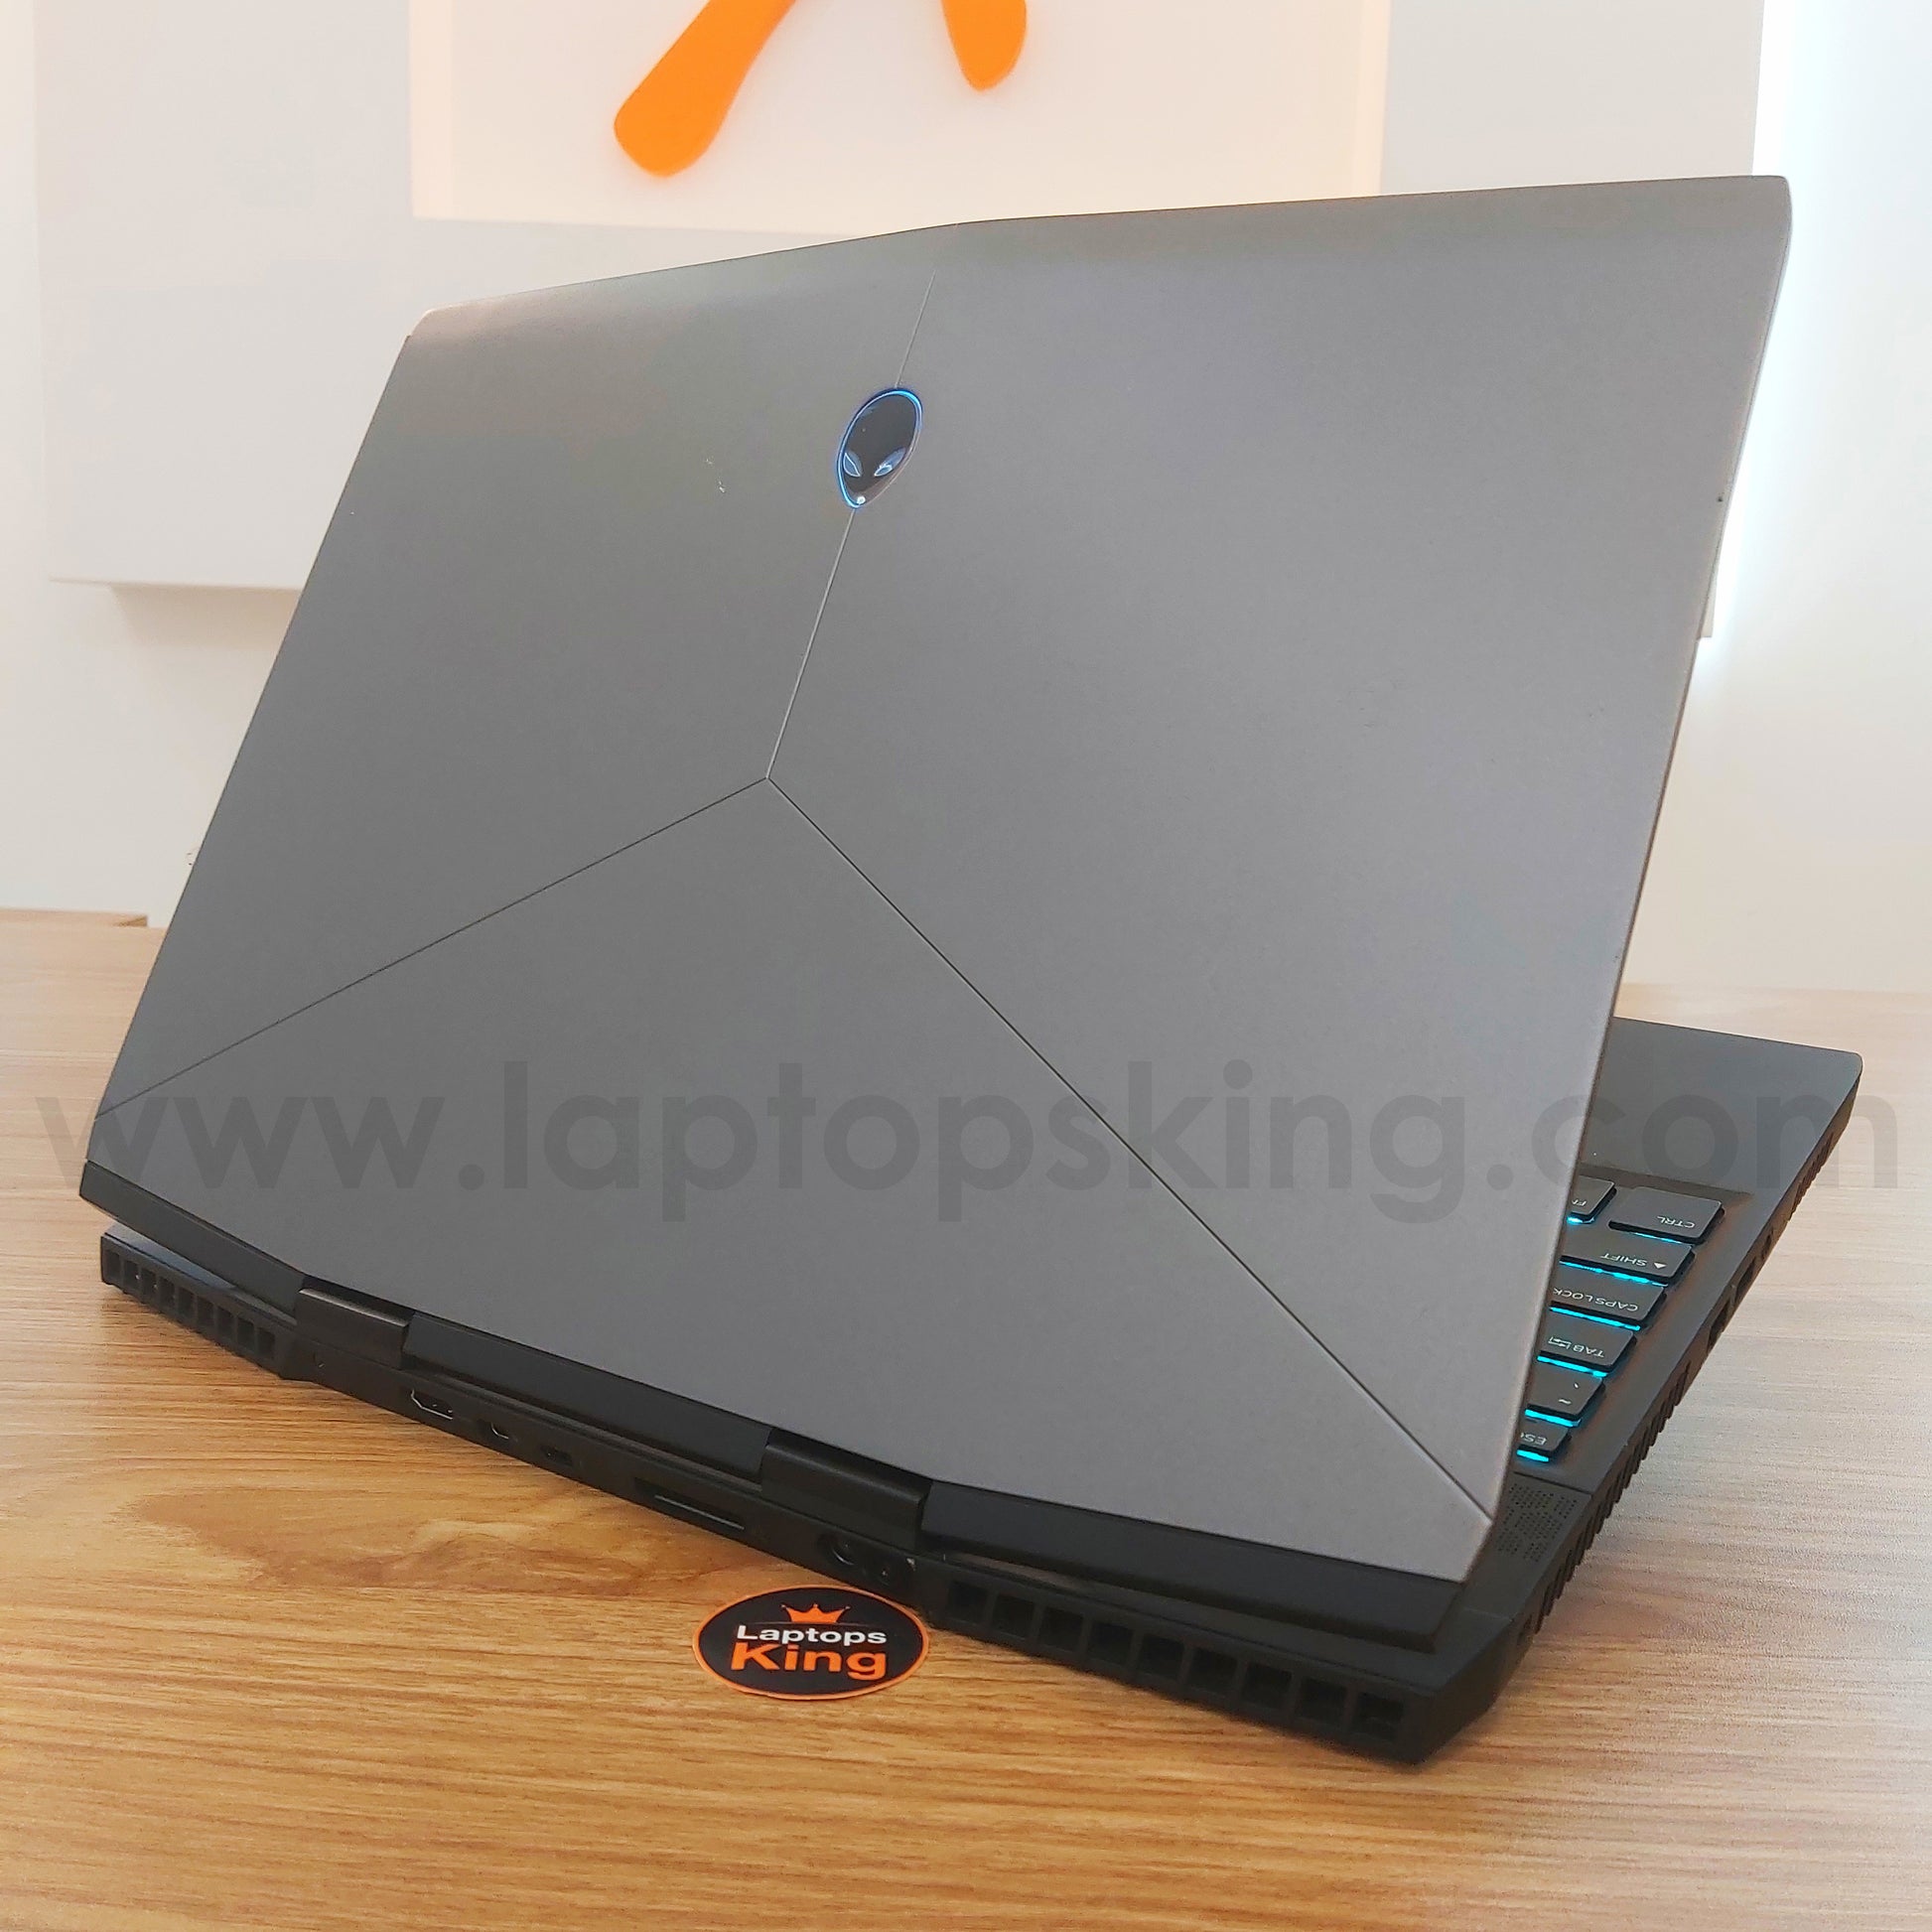 Alienware M15 Gaming Laptop Offers (Open Box) Gaming laptop, Graphic Design laptop, best laptop for gaming, best laptop for graphic design, computer for sale Lebanon, laptop for video editing in Lebanon, laptop for sale Lebanon, best graphic design laptop,	best video editing laptop, best programming laptop, laptop for sale in Lebanon, laptops for sale in Lebanon, laptop for sale in Lebanon, buy computer Lebanon, buy laptop Lebanon.